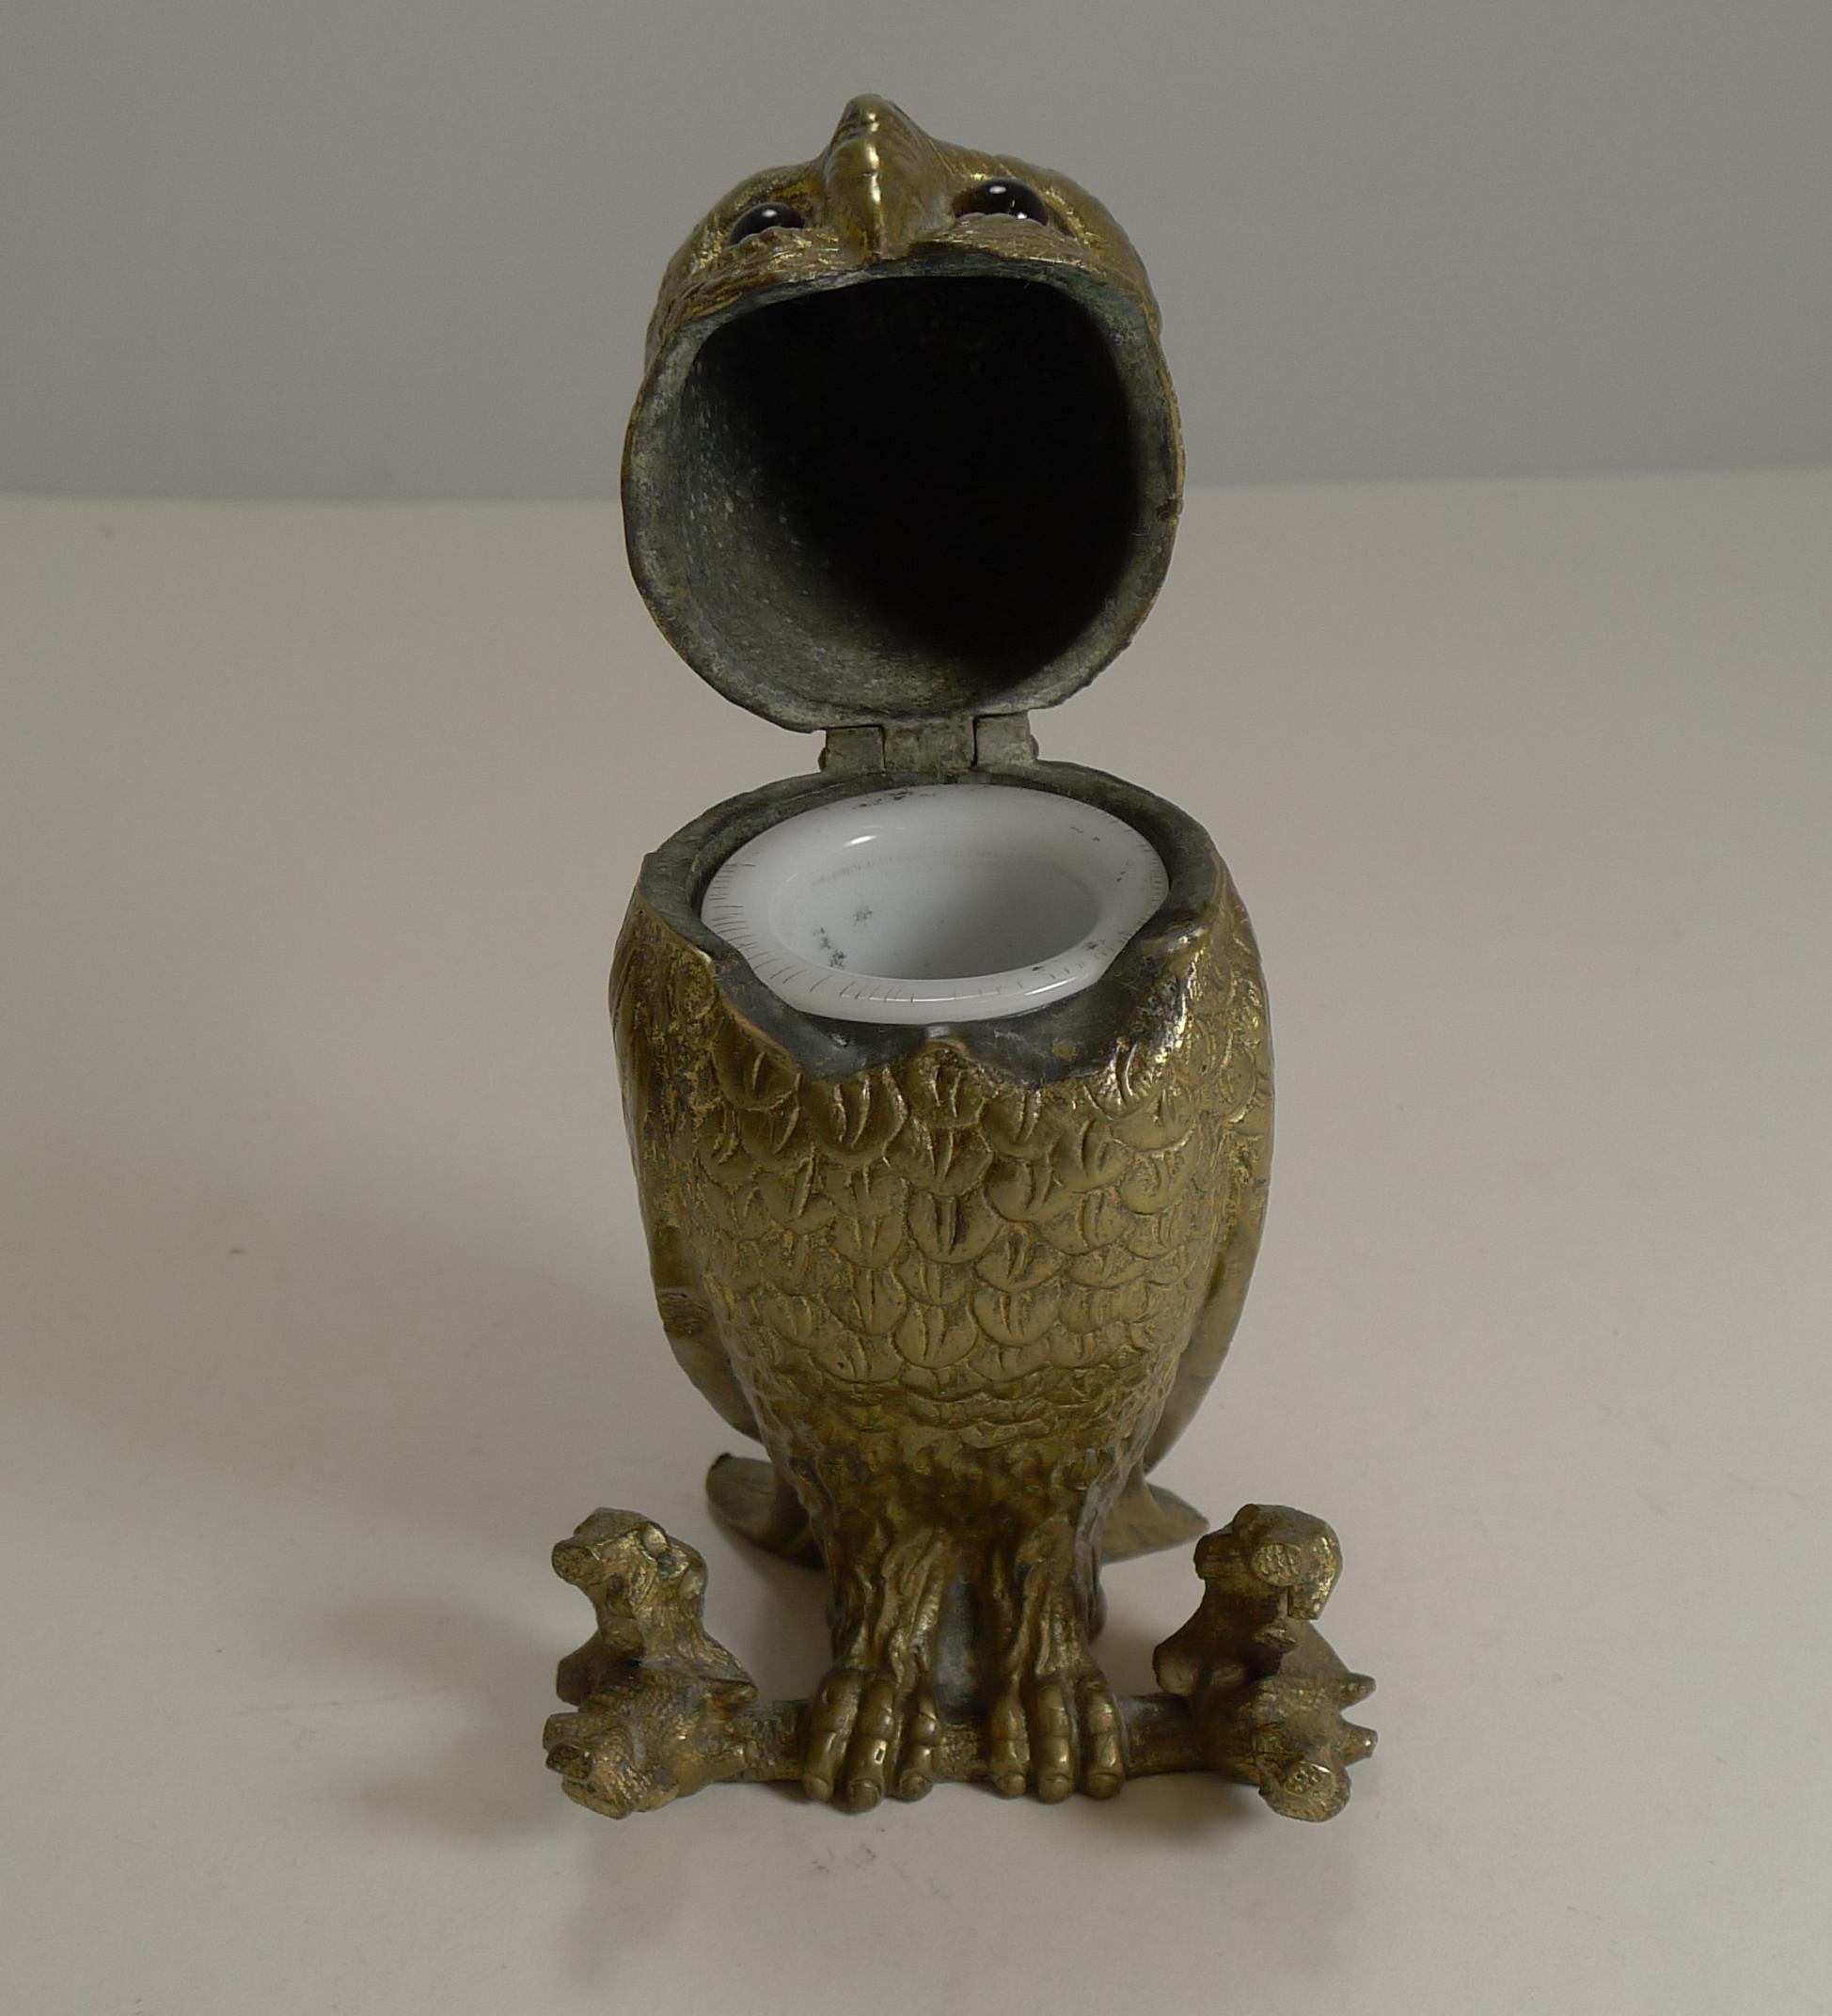 English Antique Novelty Inkwell, Gilded Bronze Owl with Glass Eyes